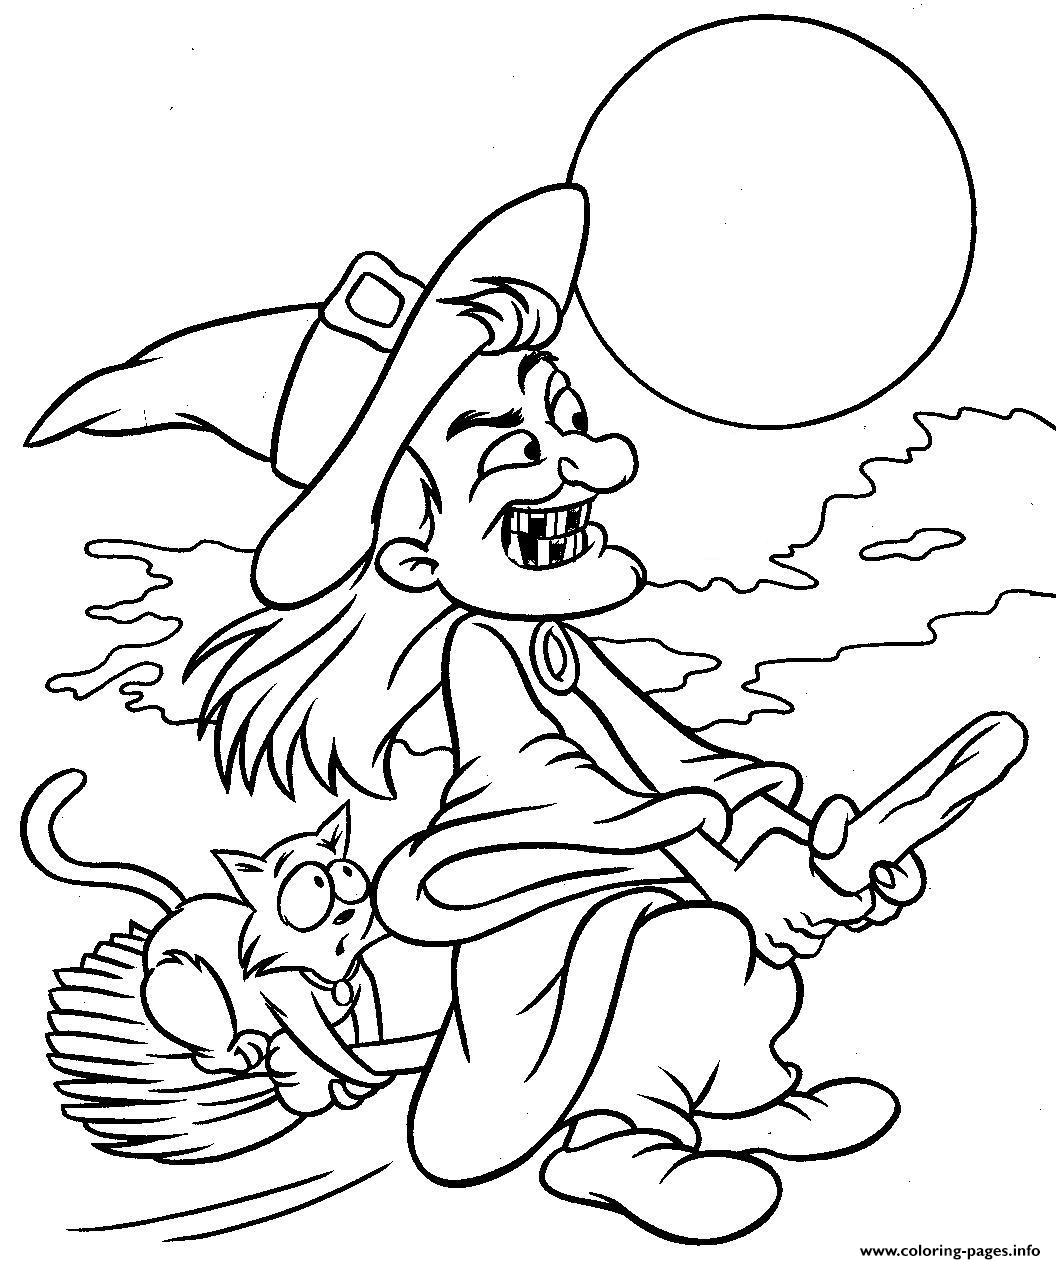 Halloween Pages For Kids To Color Witchdd41 coloring